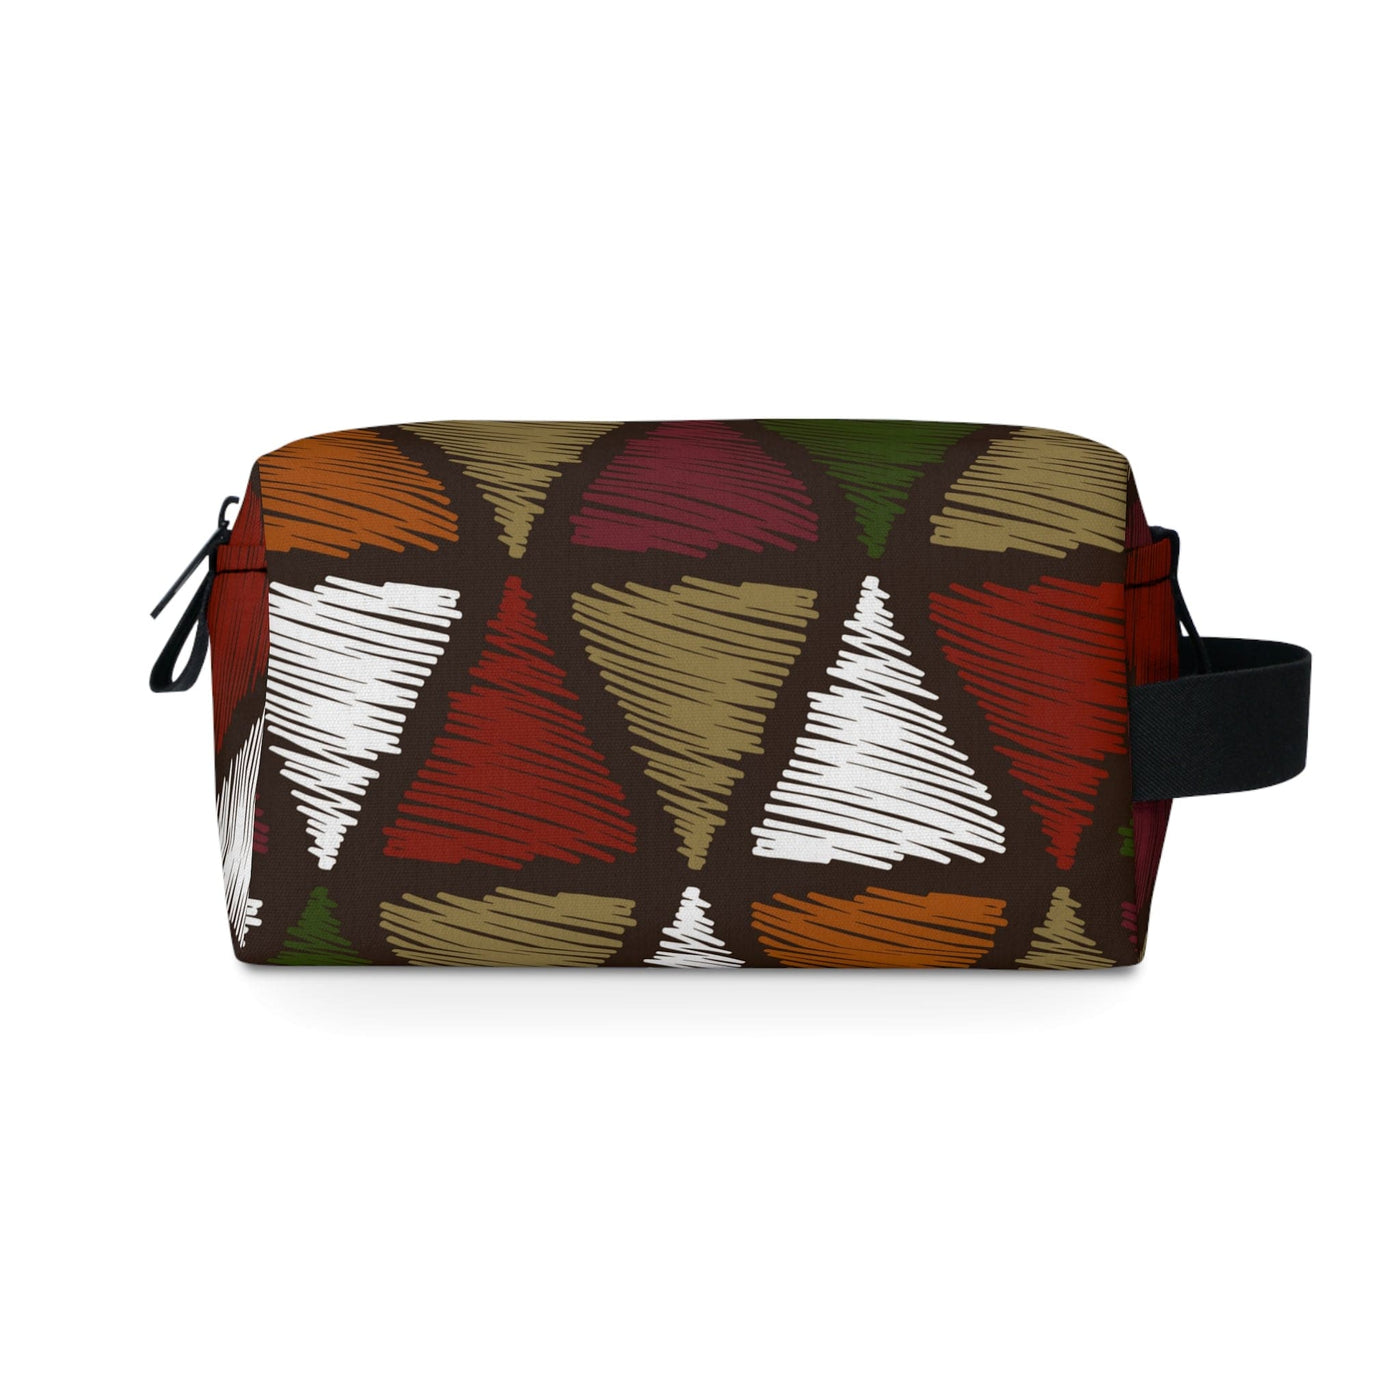 Travel Accessories Pouch Bag - Multicolor Tribal Pattern Bags